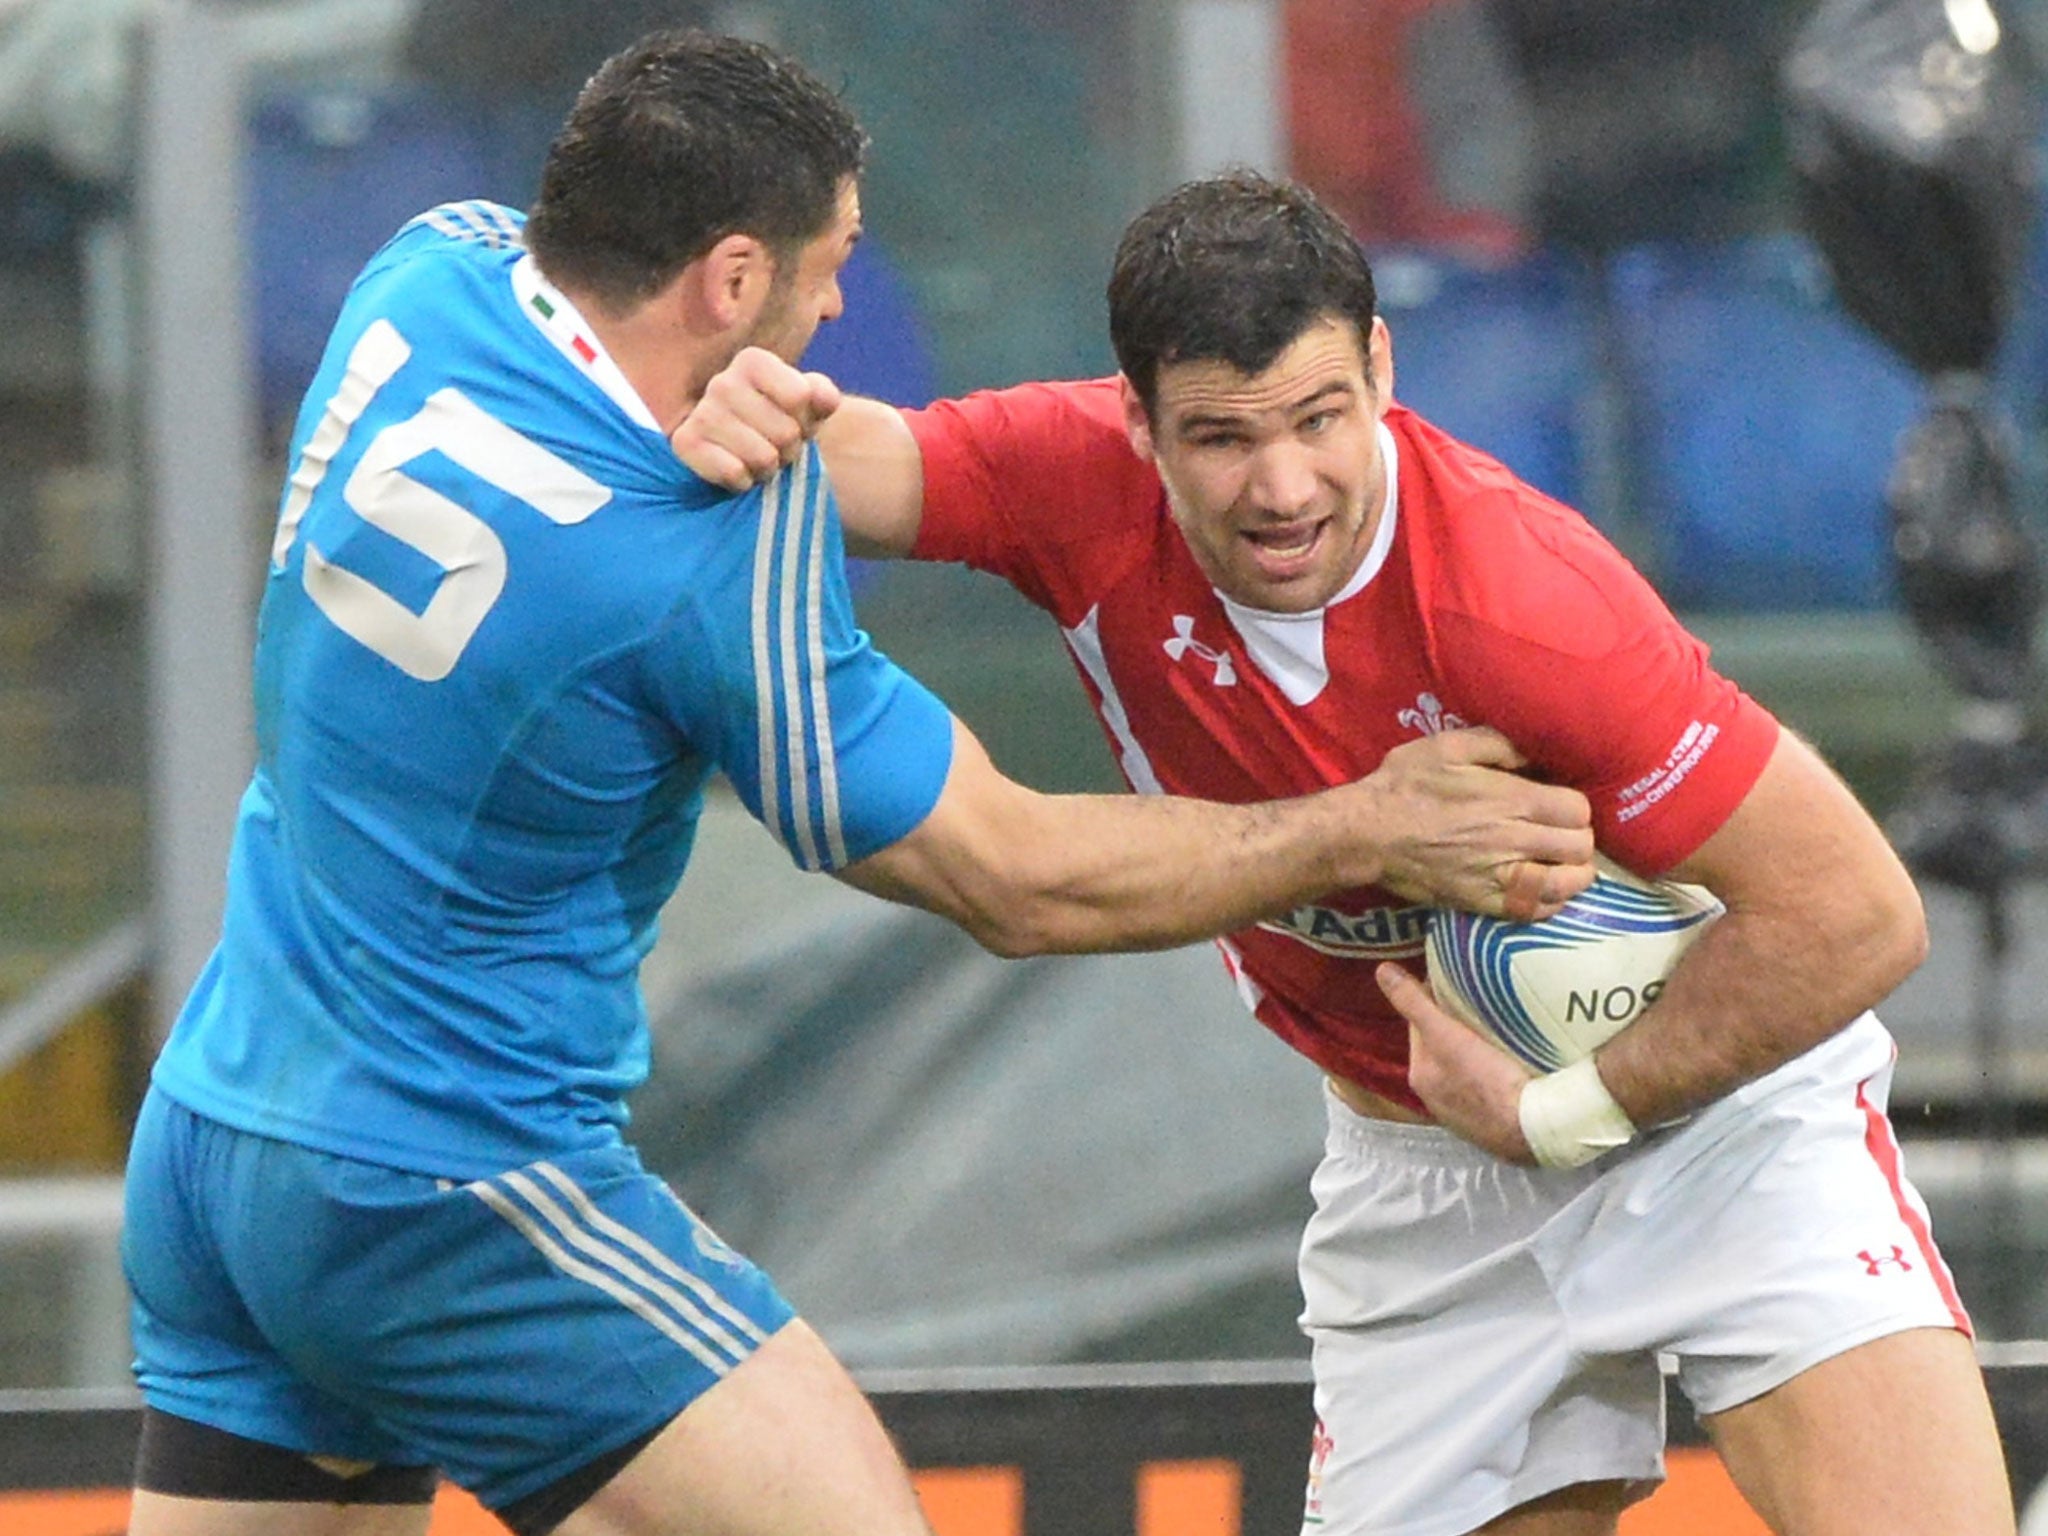 Wales' Mike Phillips tussles with an Italian player